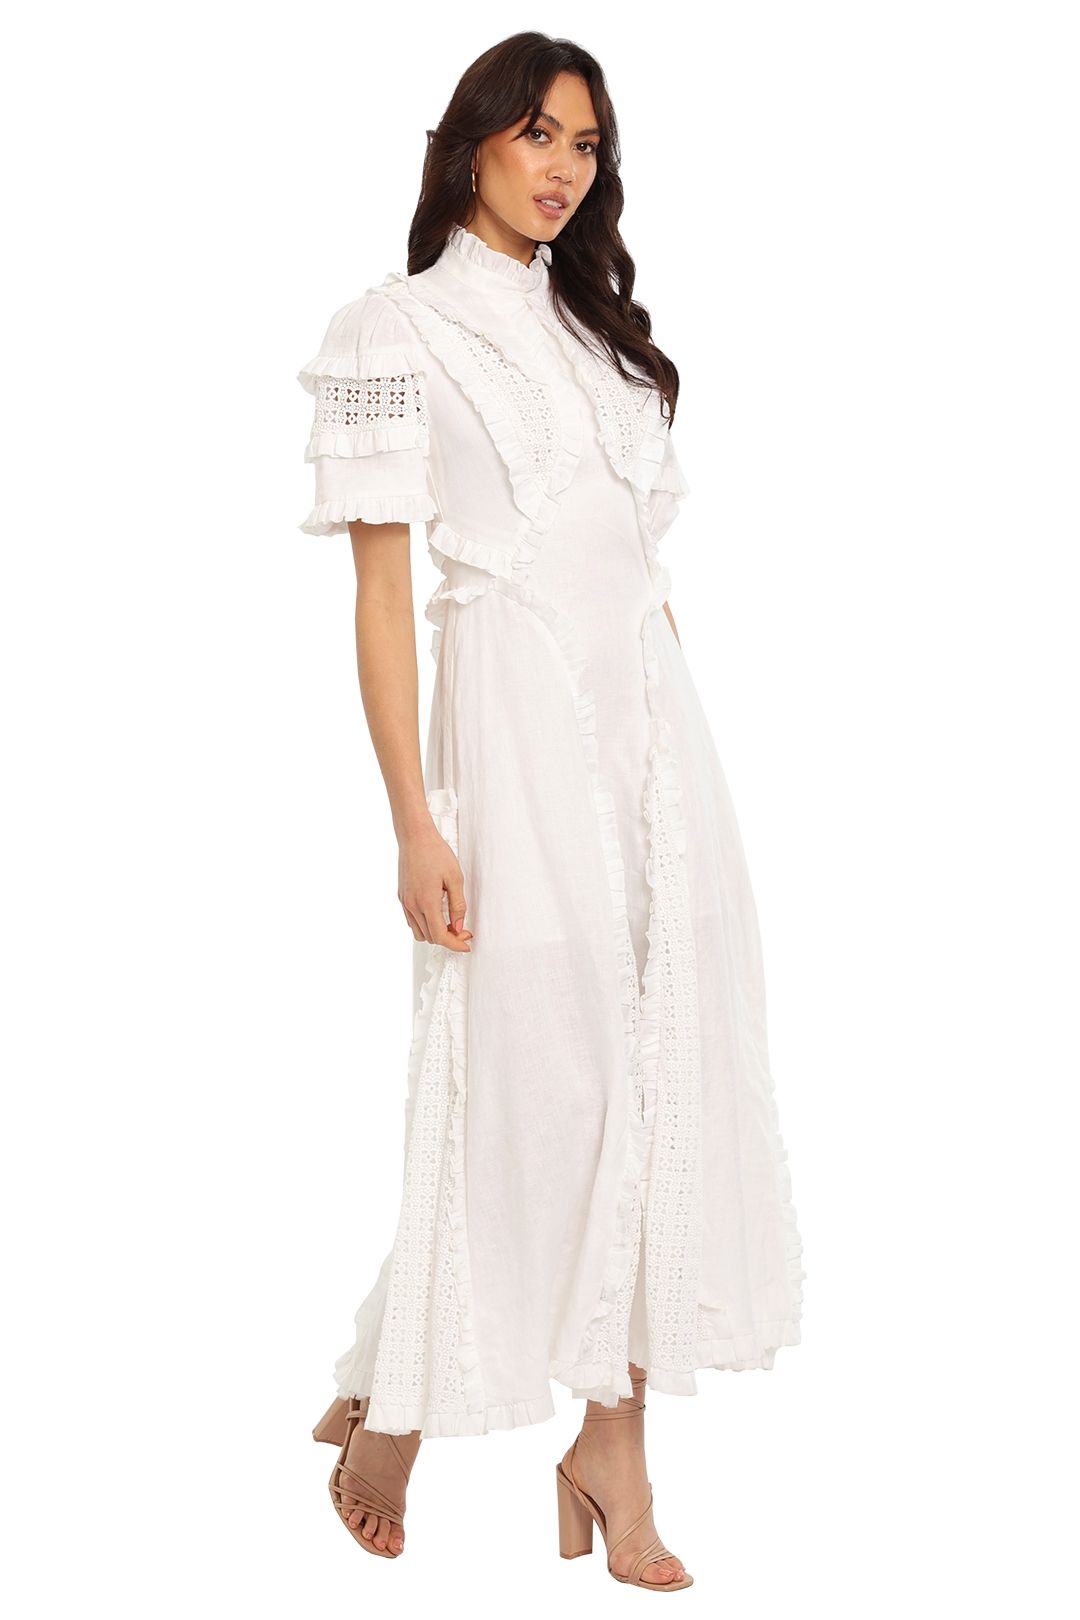 Alemais Star Lace Spliced Dress Puff Sleeves